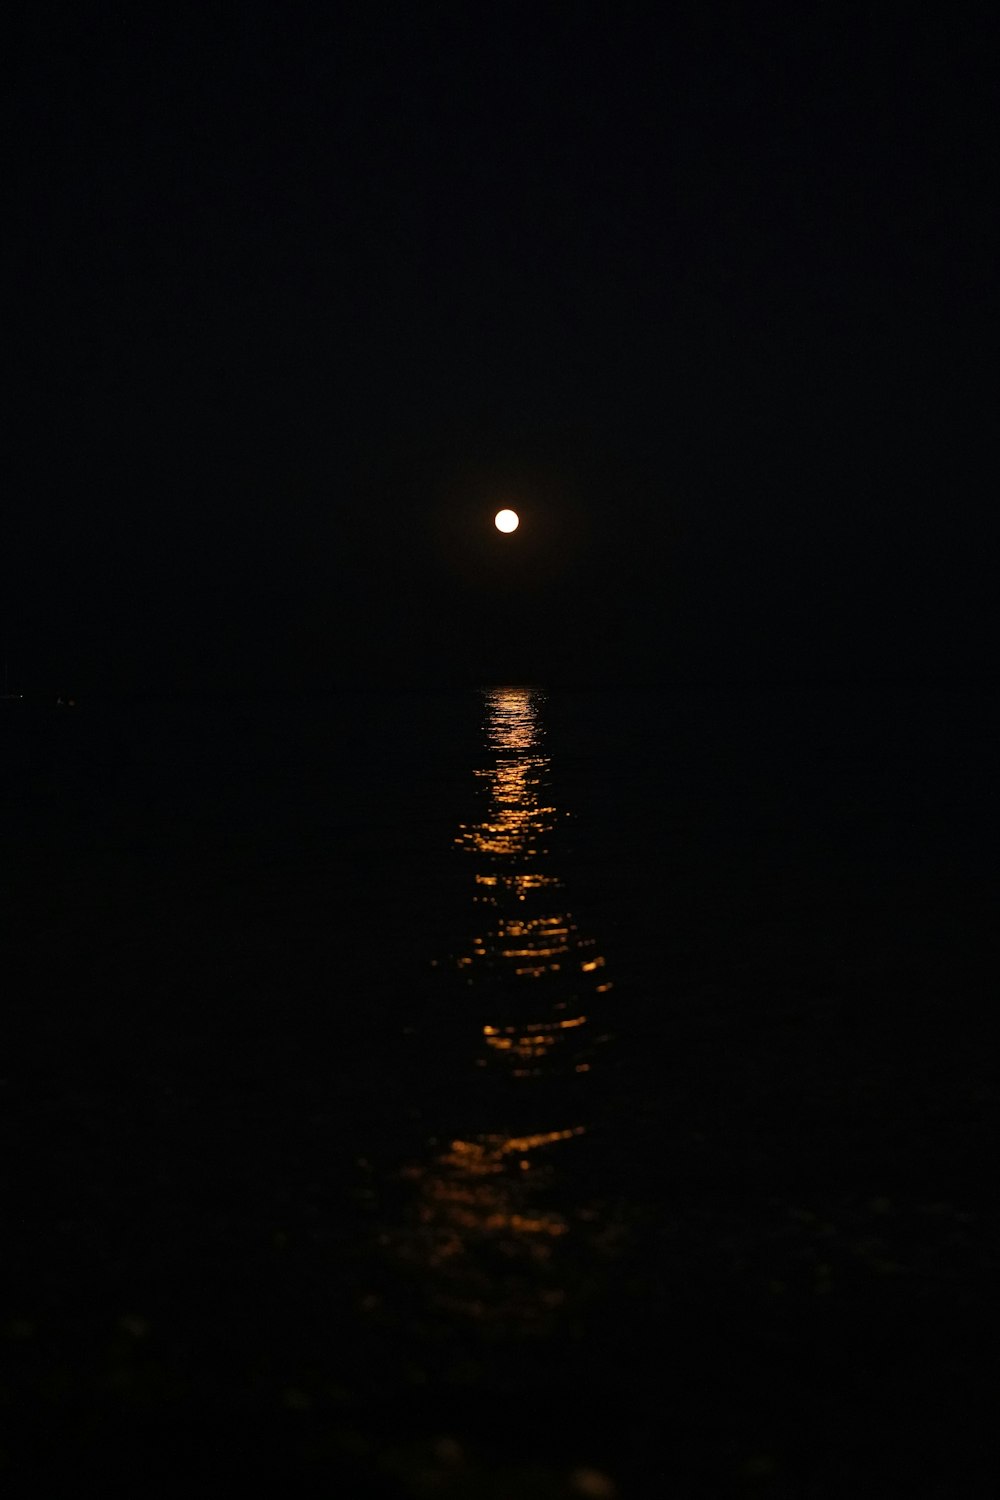 a full moon shining over the ocean at night